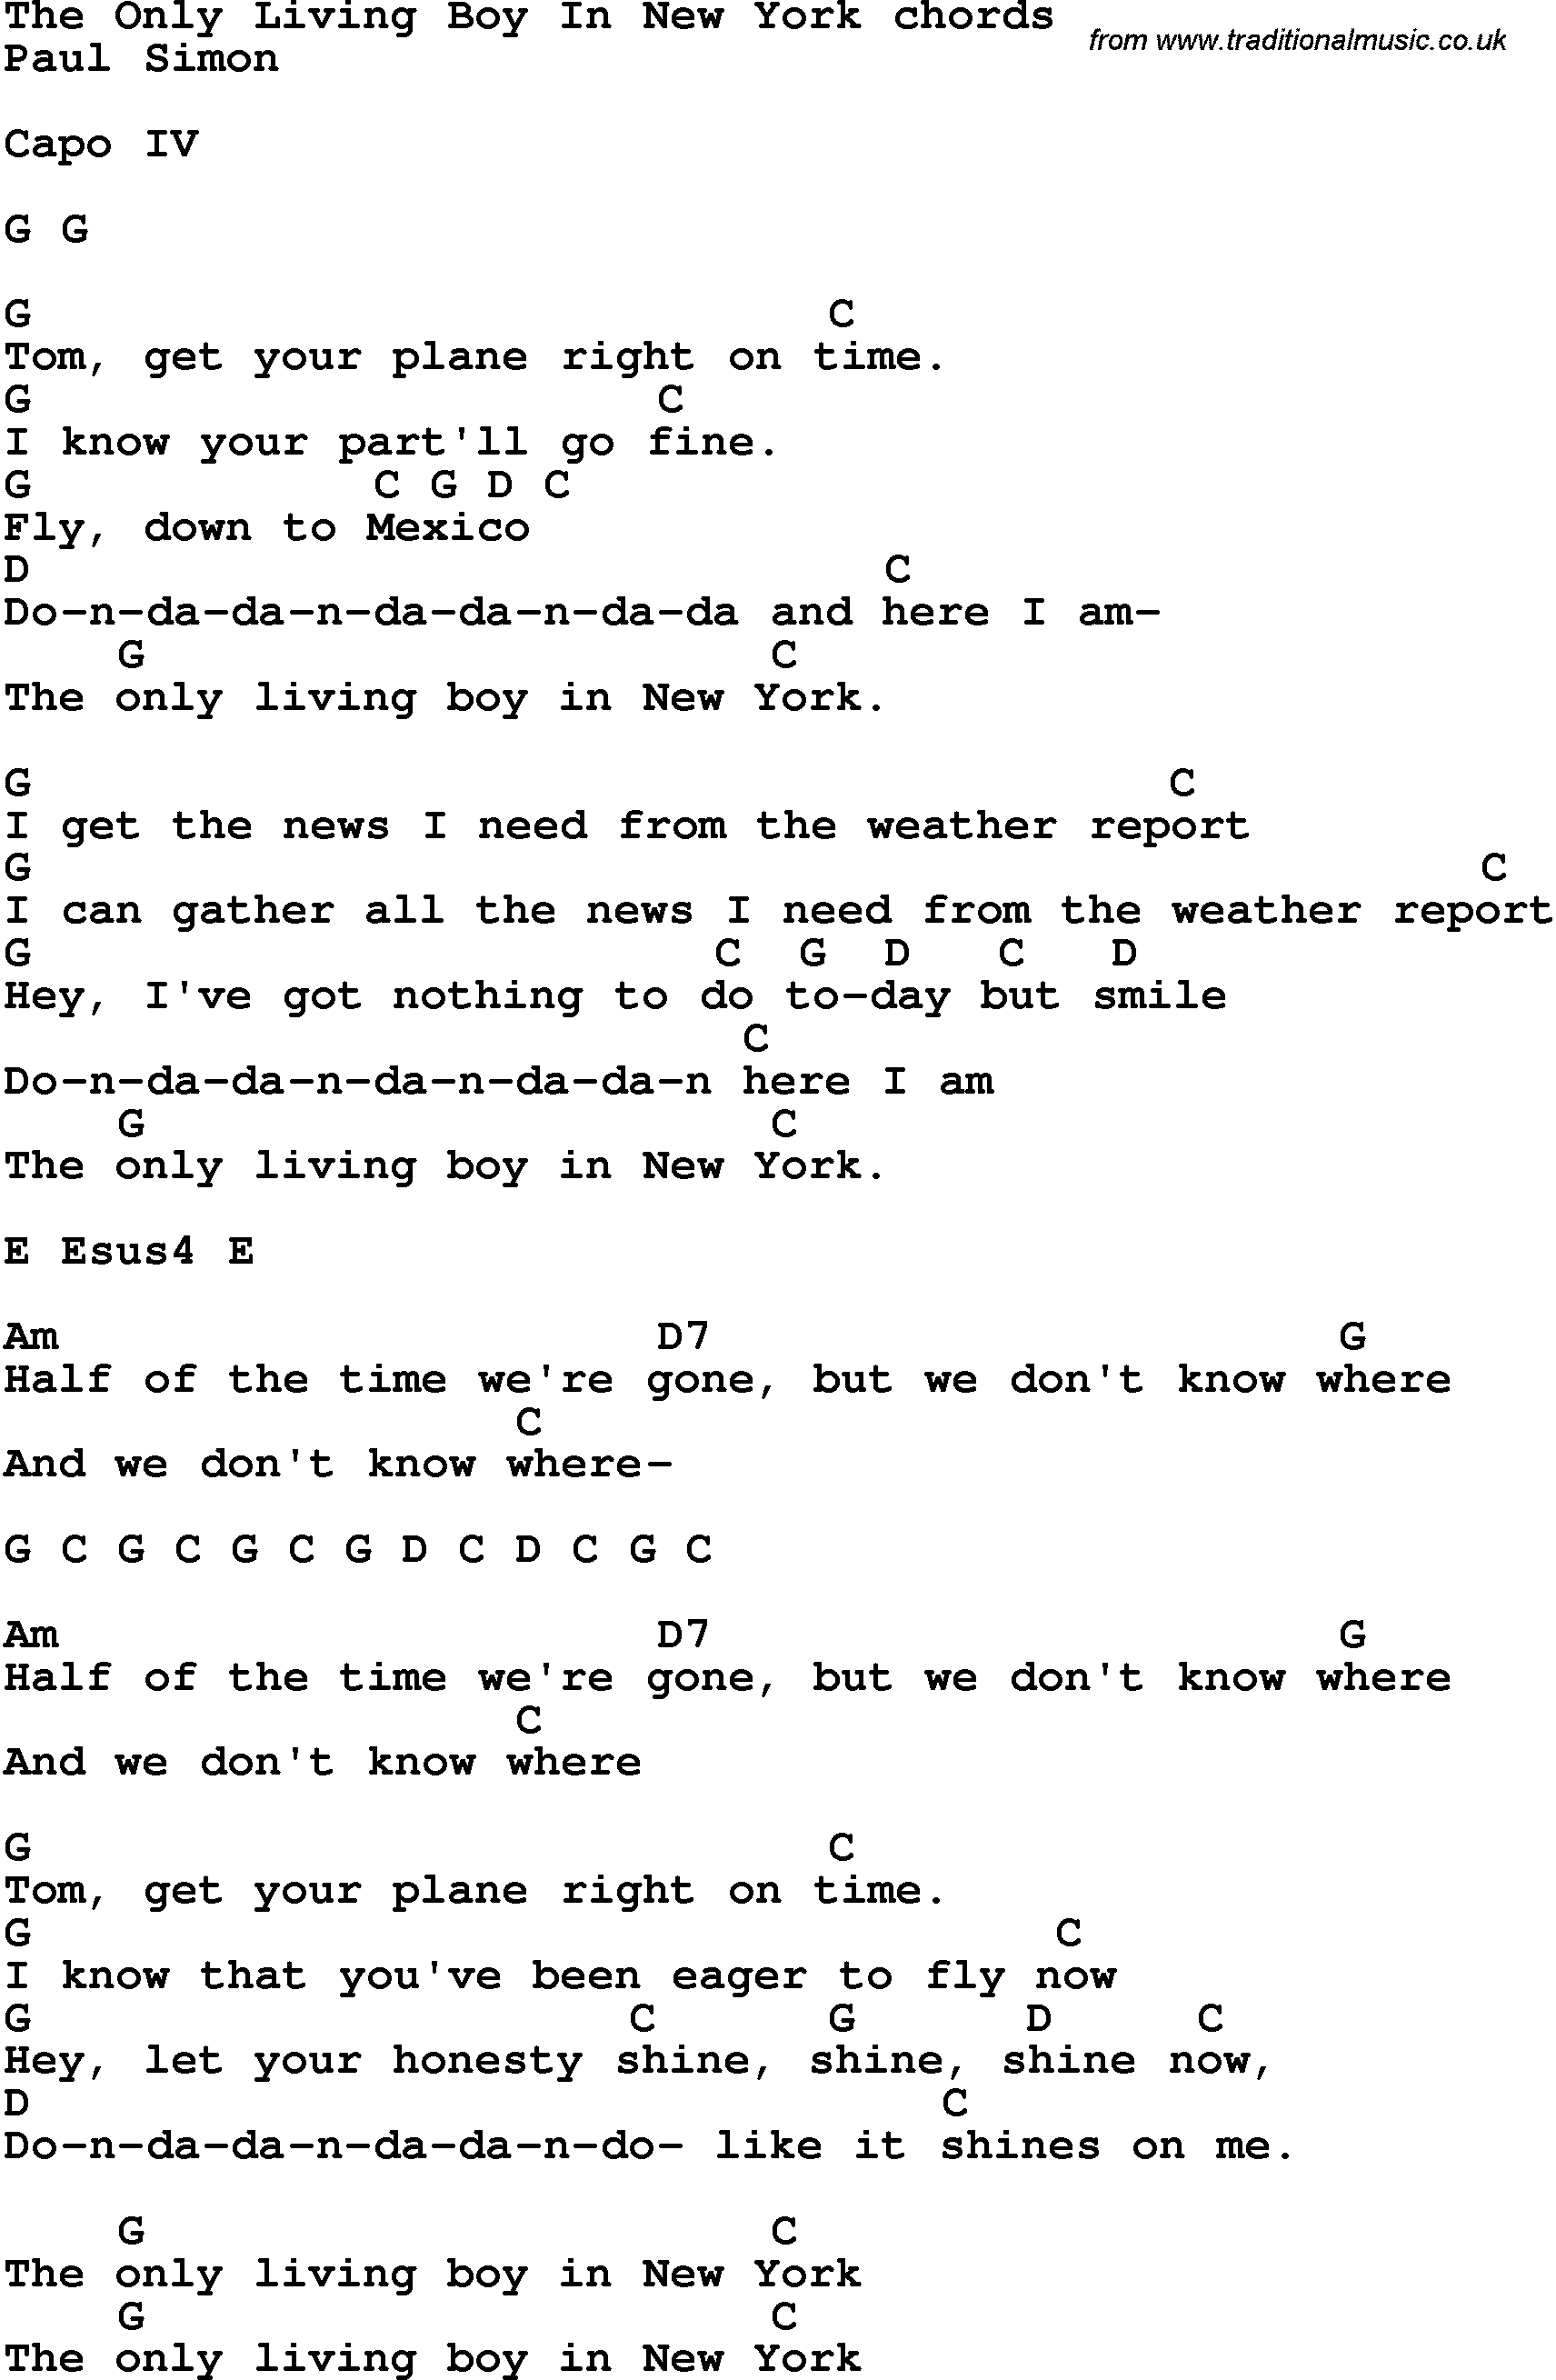 Song Lyrics with guitar chords for The Only Living Boy In New York